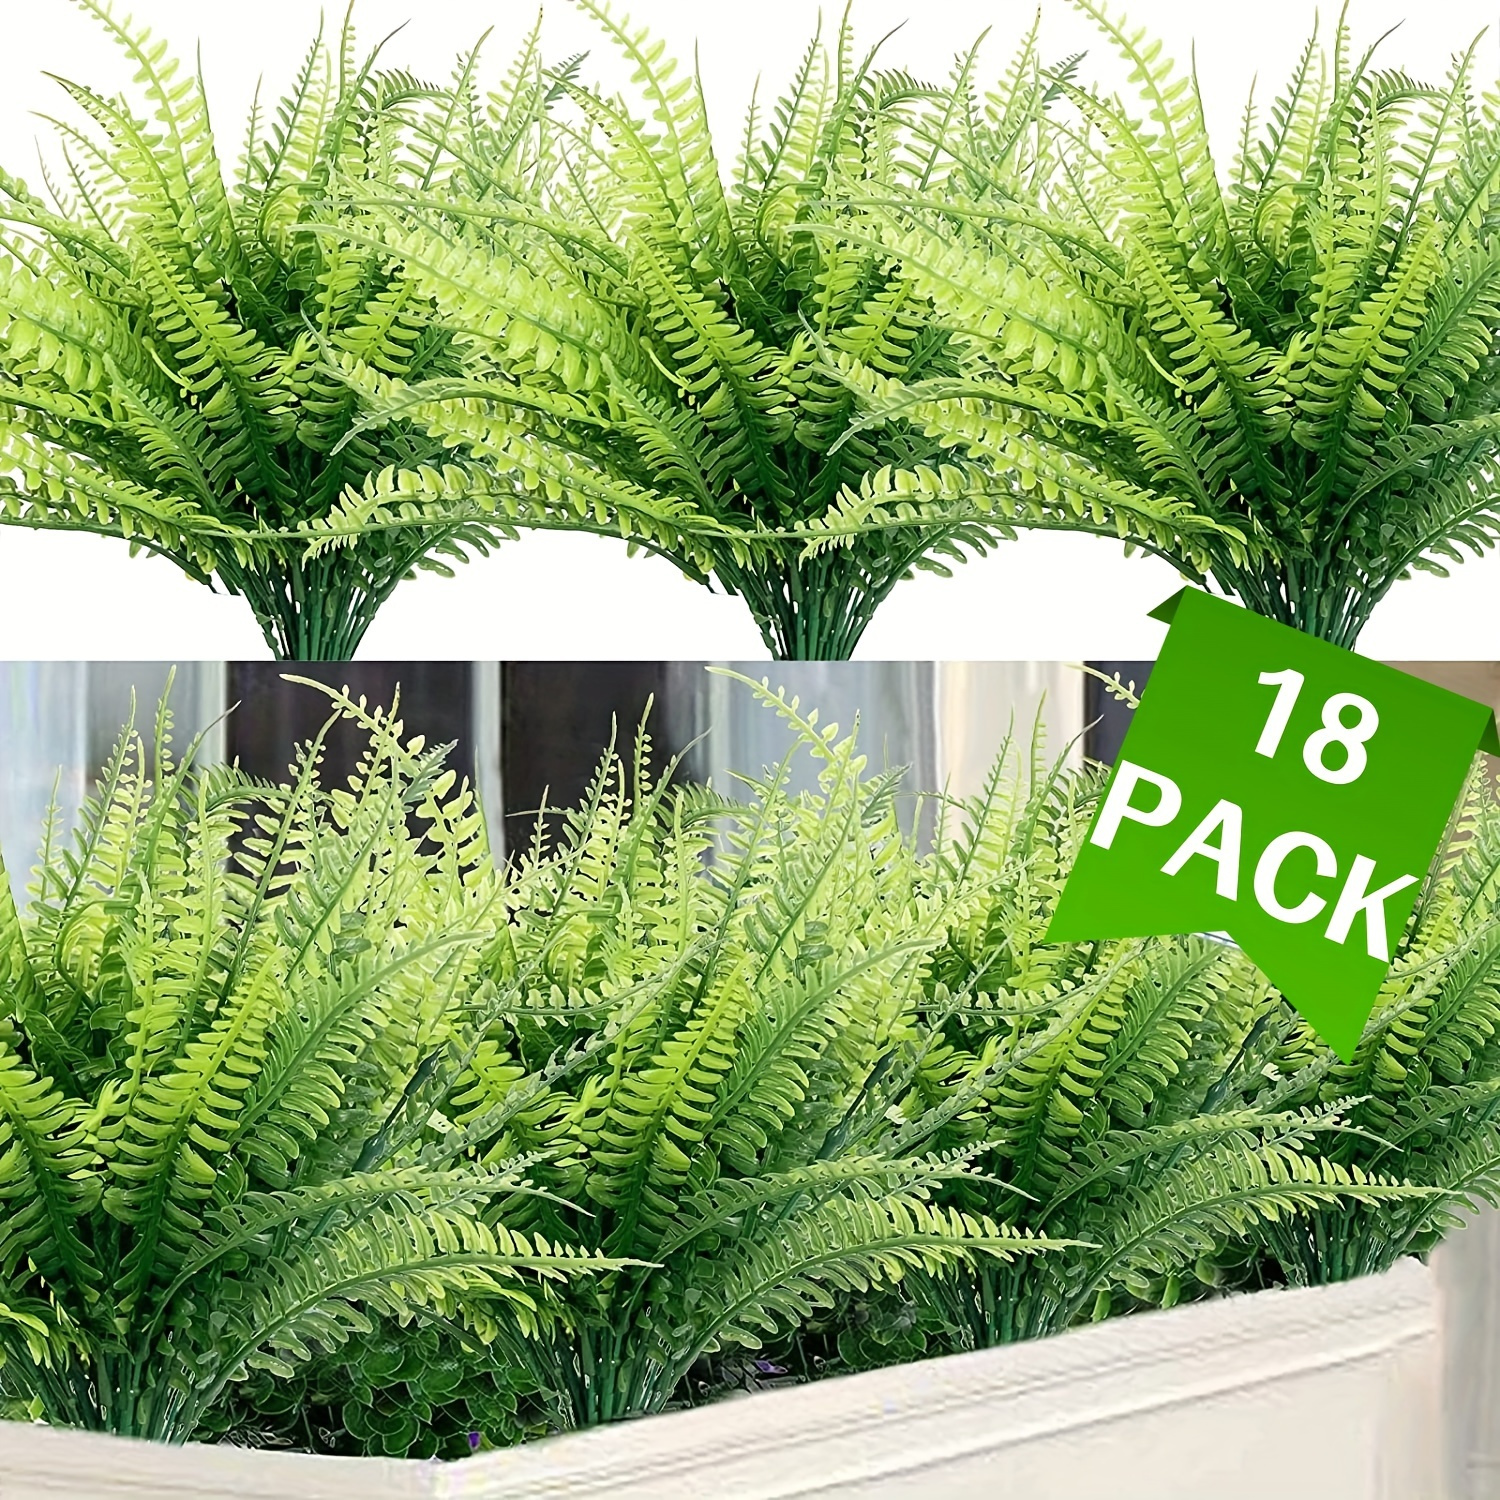 

10/18 Bundle Set Of Uv Resistant Artificial Ferns, Perfect For Indoor/outdoor Patios & Home Gardens, Great For Holidays & Seasonal Decor, Low-maintenance Greenery